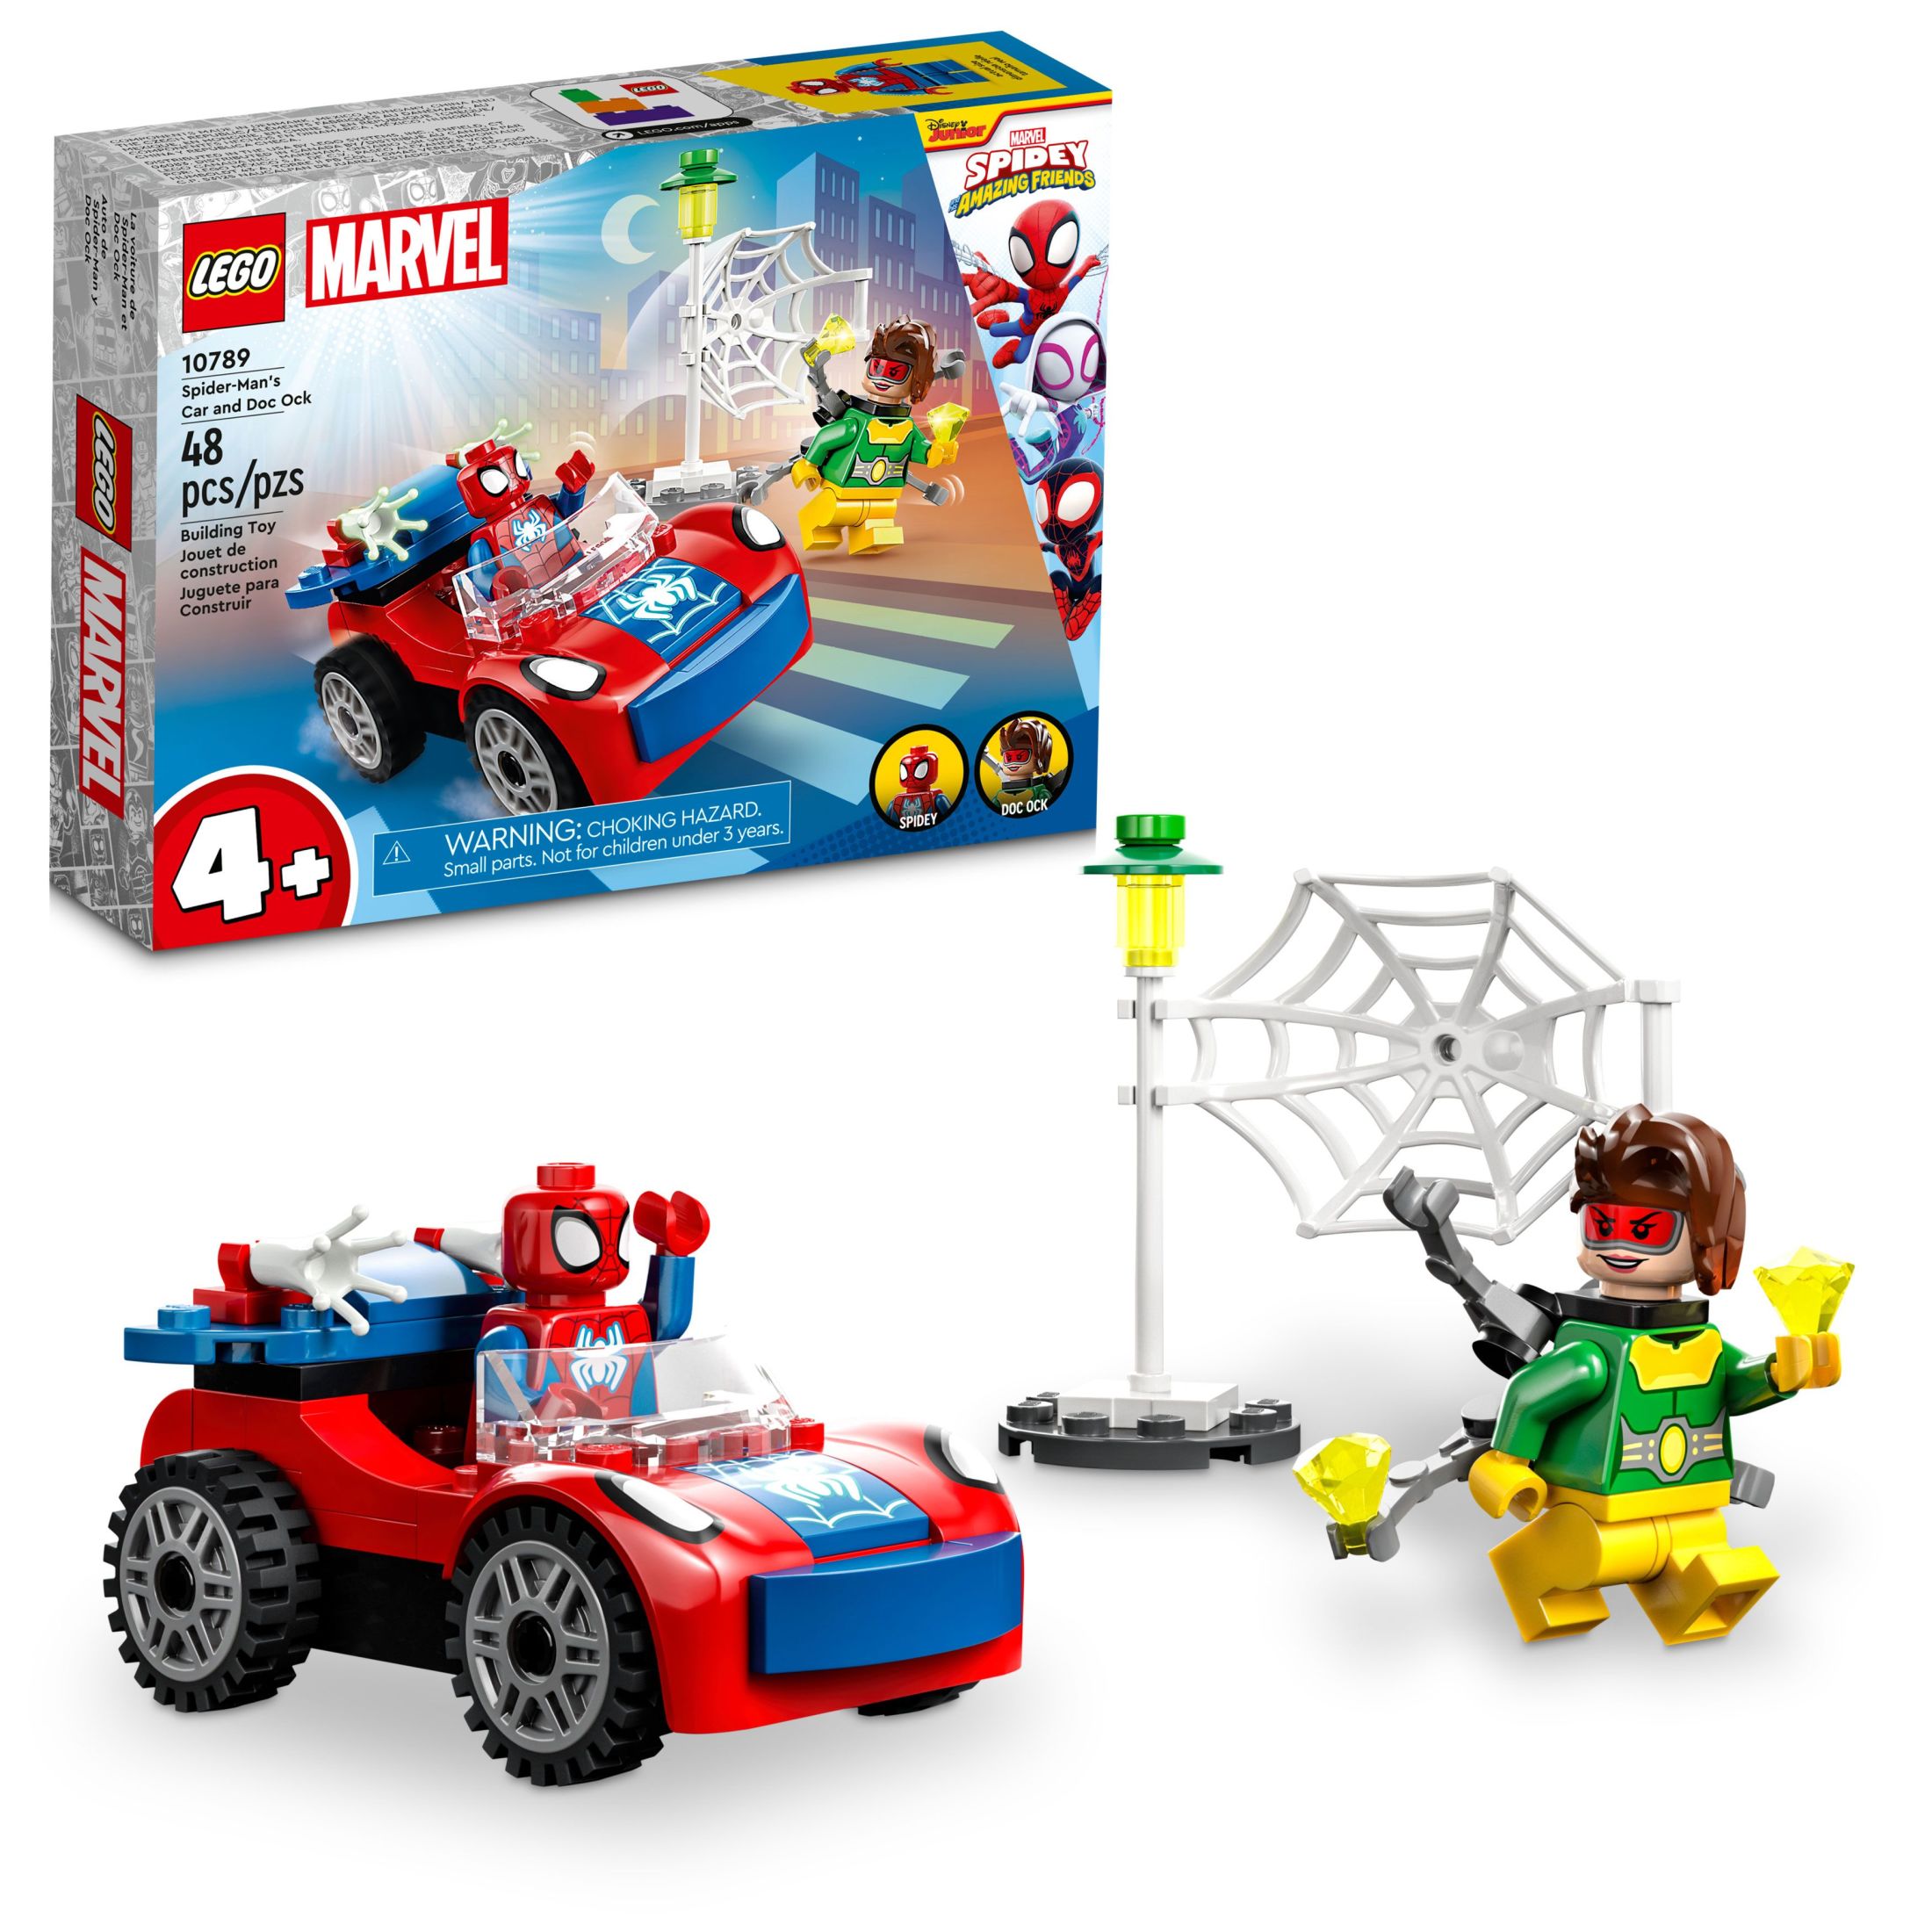 LEGO Marvel Spider-Man's Car and Doc Ock Set 10789, Spidey and His Amazing Friends Buildable Toy for Kids 4 Plus Years Old with Glow in the Dark Pieces - image 1 of 8